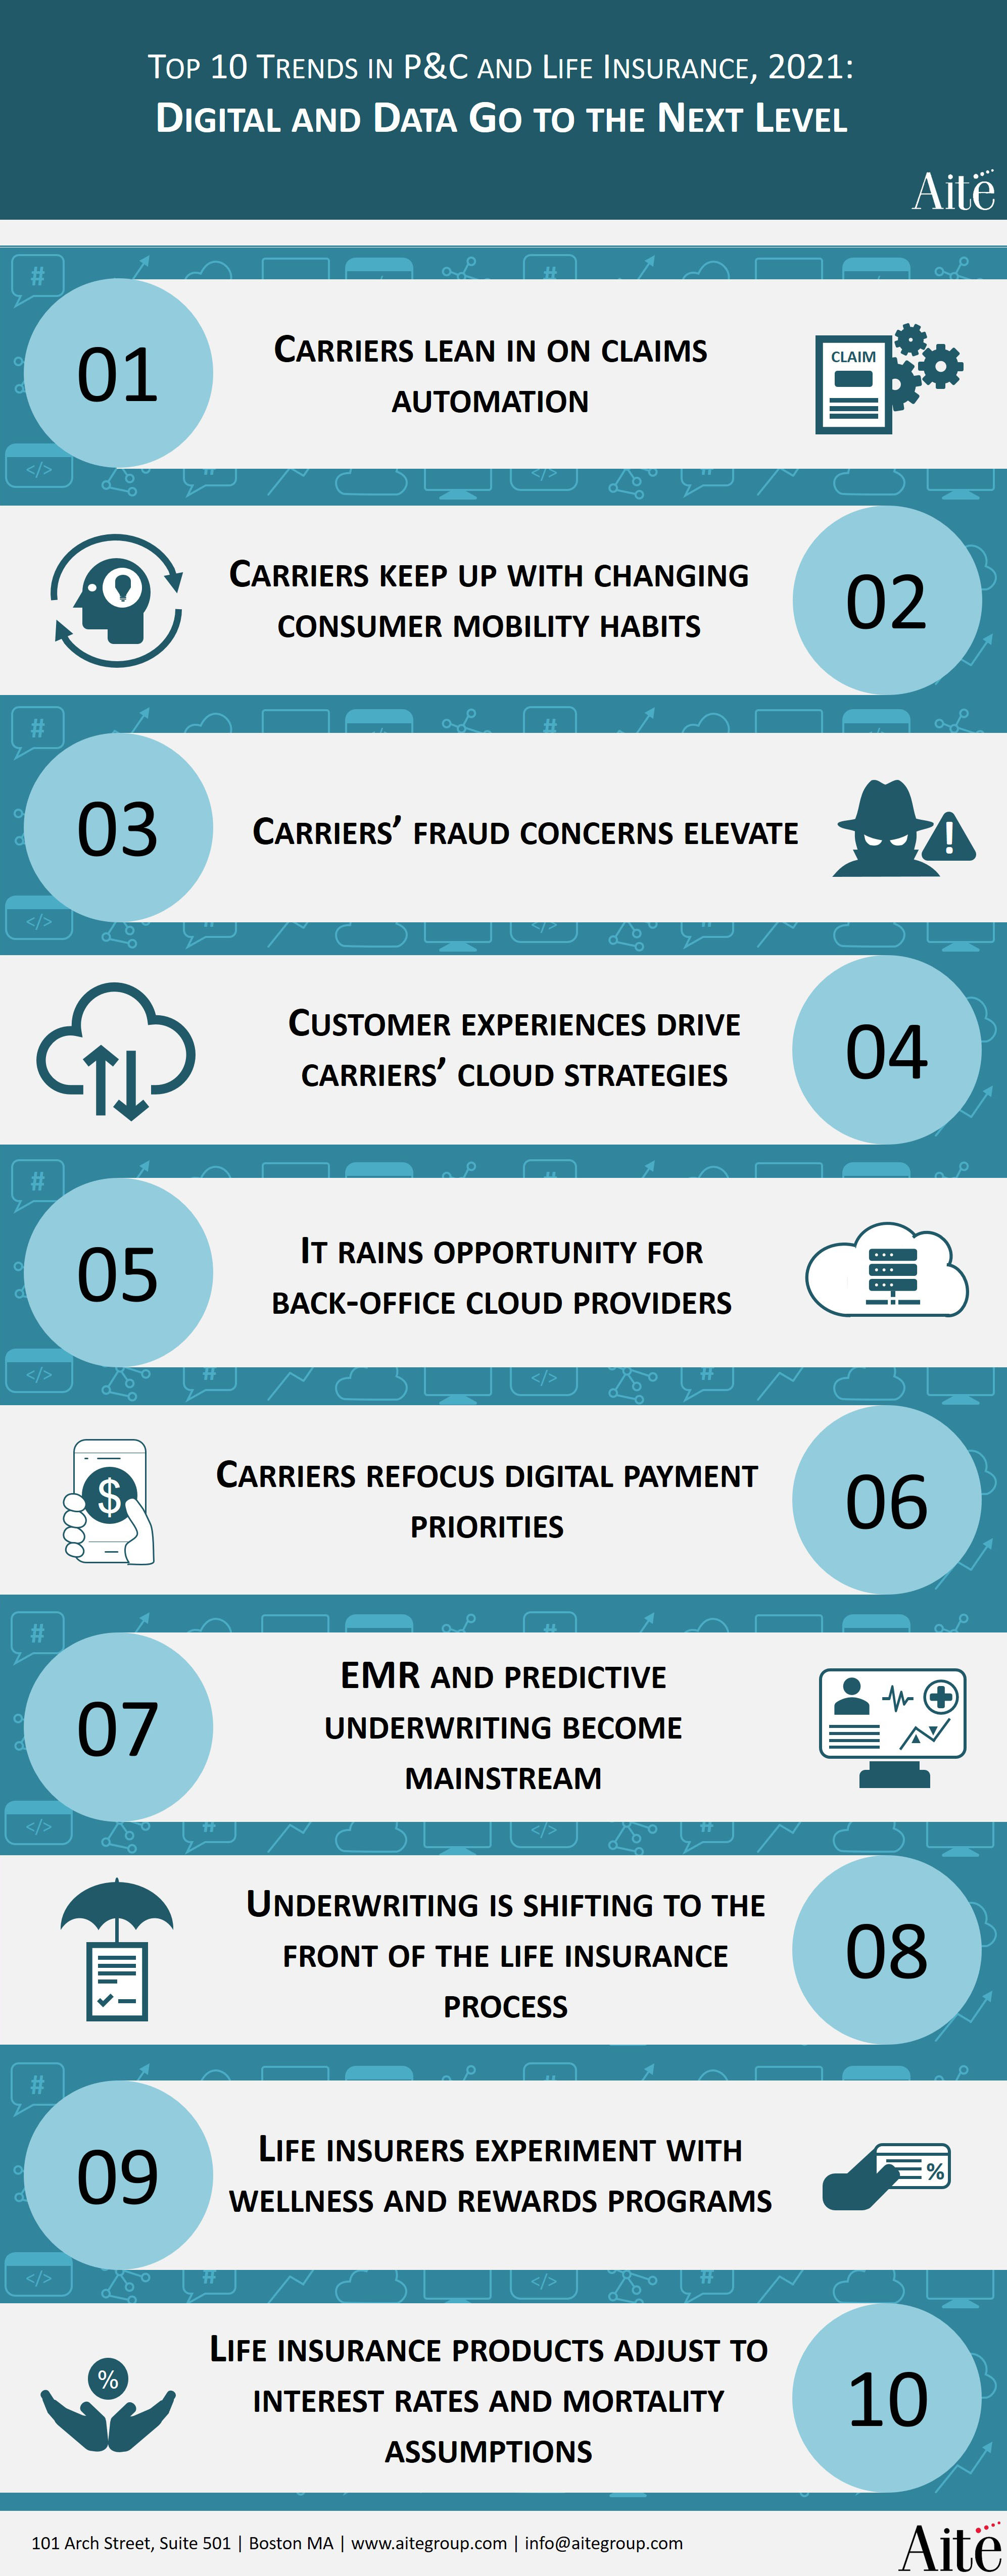 Top 10 Trends in P&C and Life Insurance, 2021 Digital and Data Go to